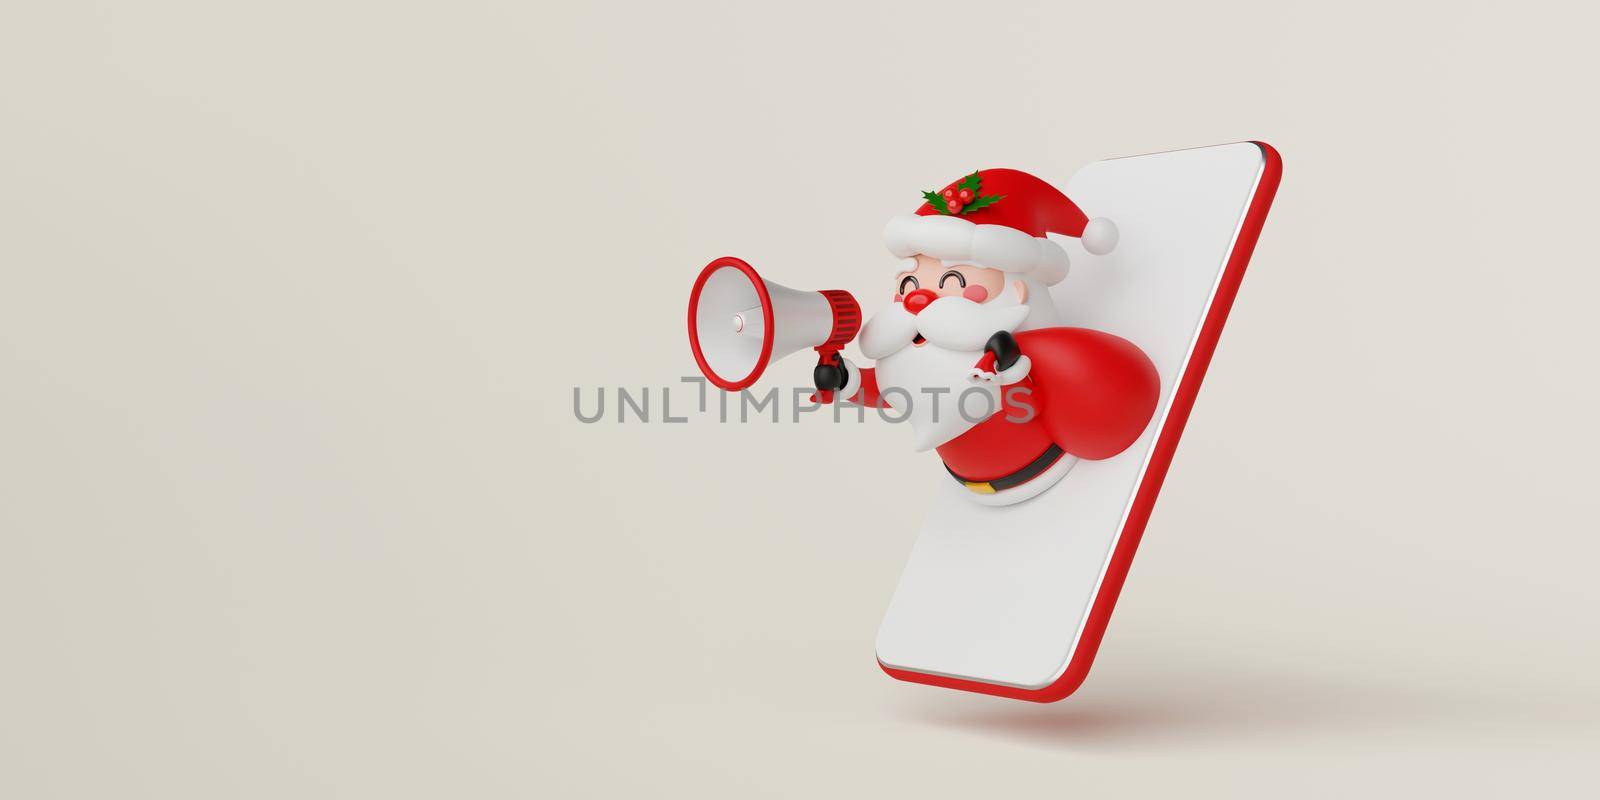 Christmas advertisement banner, Shopping online on mobile concept, Santa Claus hand holding megaphone pop out from mobile, 3d illustration by nutzchotwarut